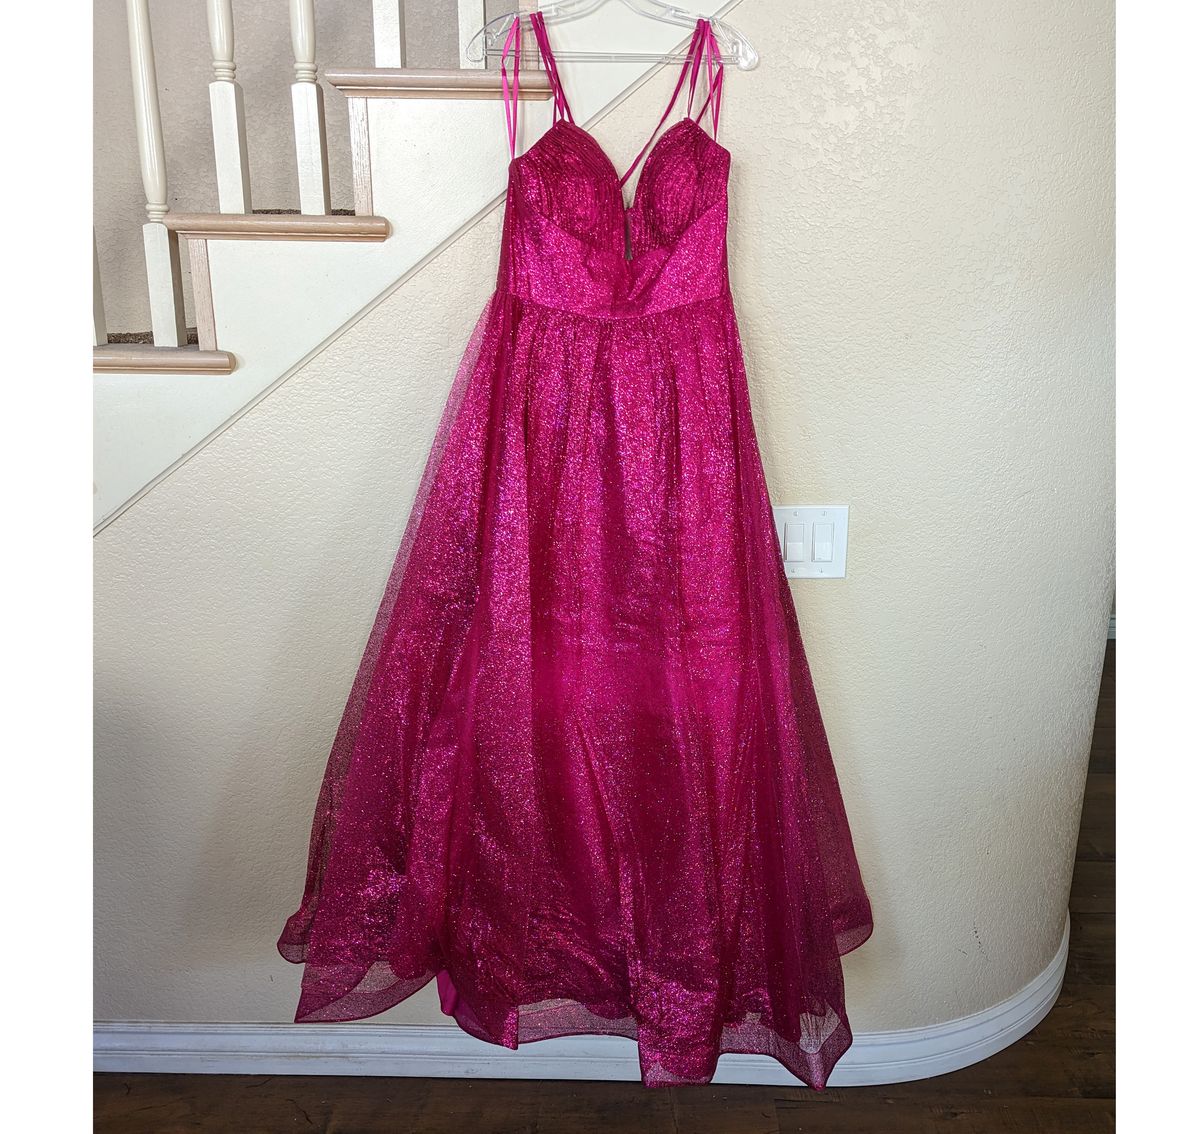 Style Fuchsia Pink Sweetheart Neckline Glitter A-line Ball Gown Cinderella Size 4 Sheer Pink Ball Gown on Queenly